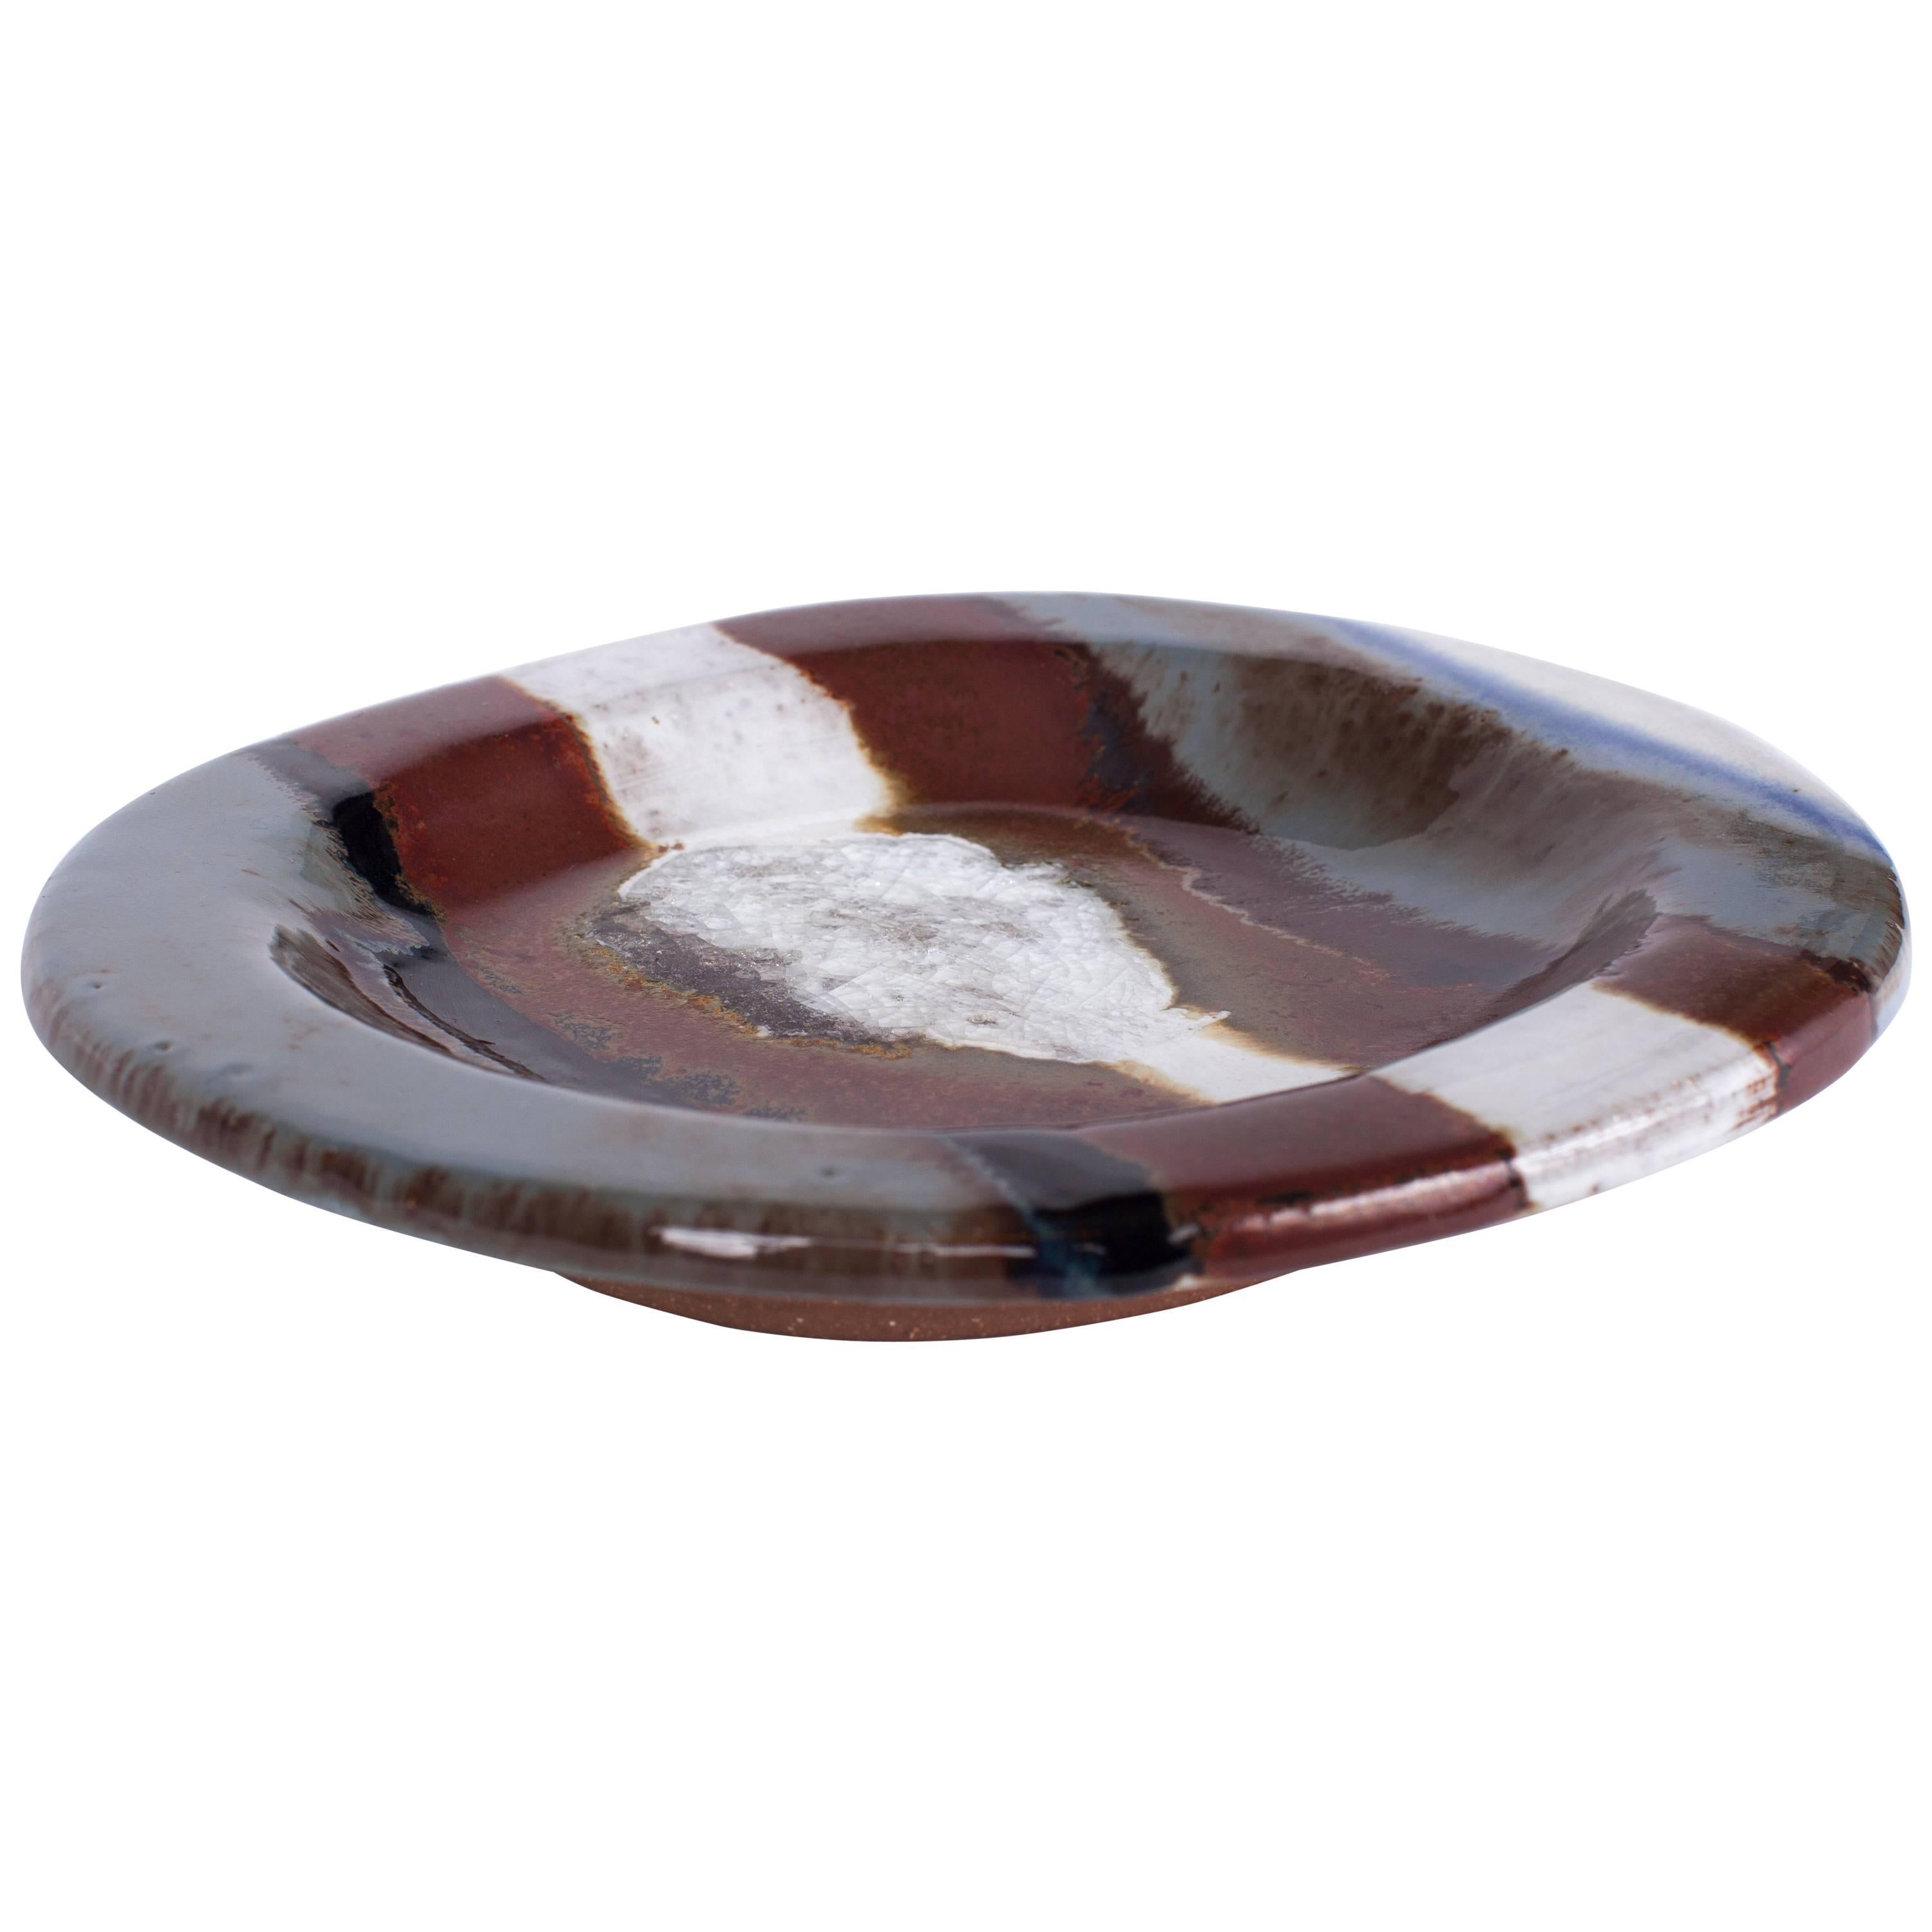 Crackle-Glaze Ceramic Dish by Jacques Pouchain in Black and Brown, France 1980's